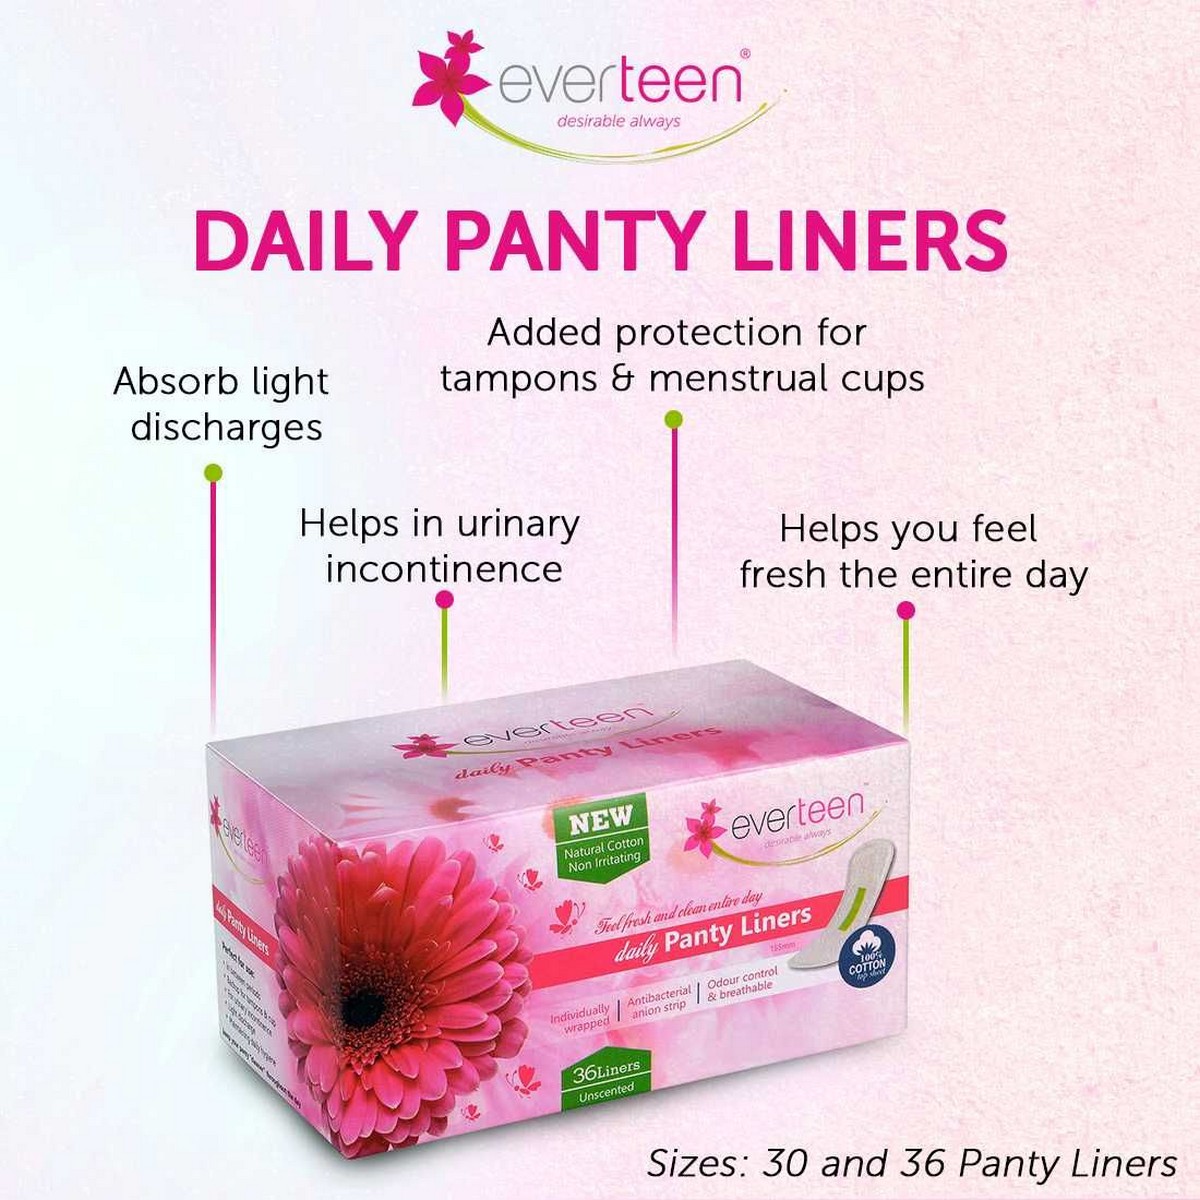 Everteen Daily Panty Liners 2 Packs 36 Liners Each  Everteen Daily Panty Liners With Antibacterial Strip for Light Discharge and Leakage in Women 2 Packs 36 Panty Liners Each 2